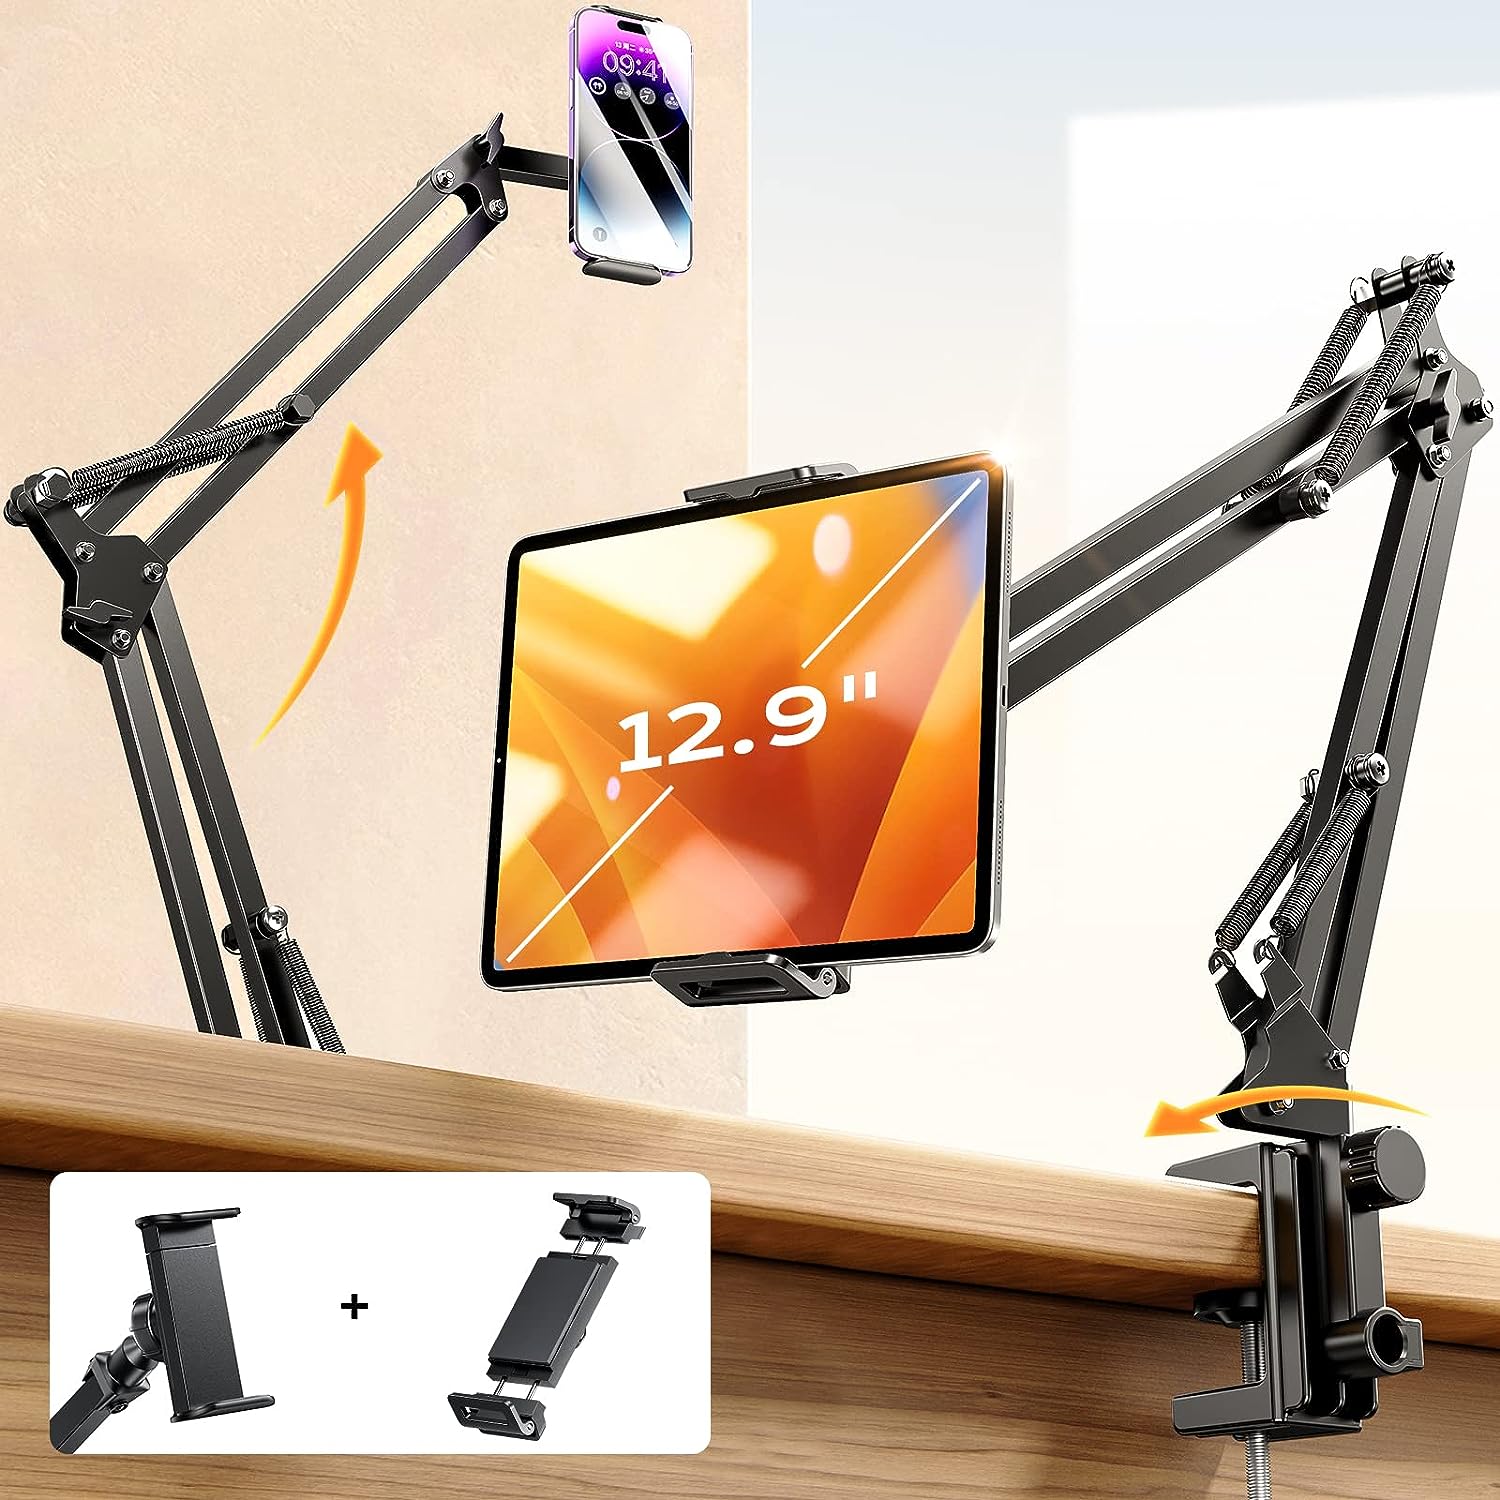 Lisen 2 Clamps Tablet Phone Stand for Desk